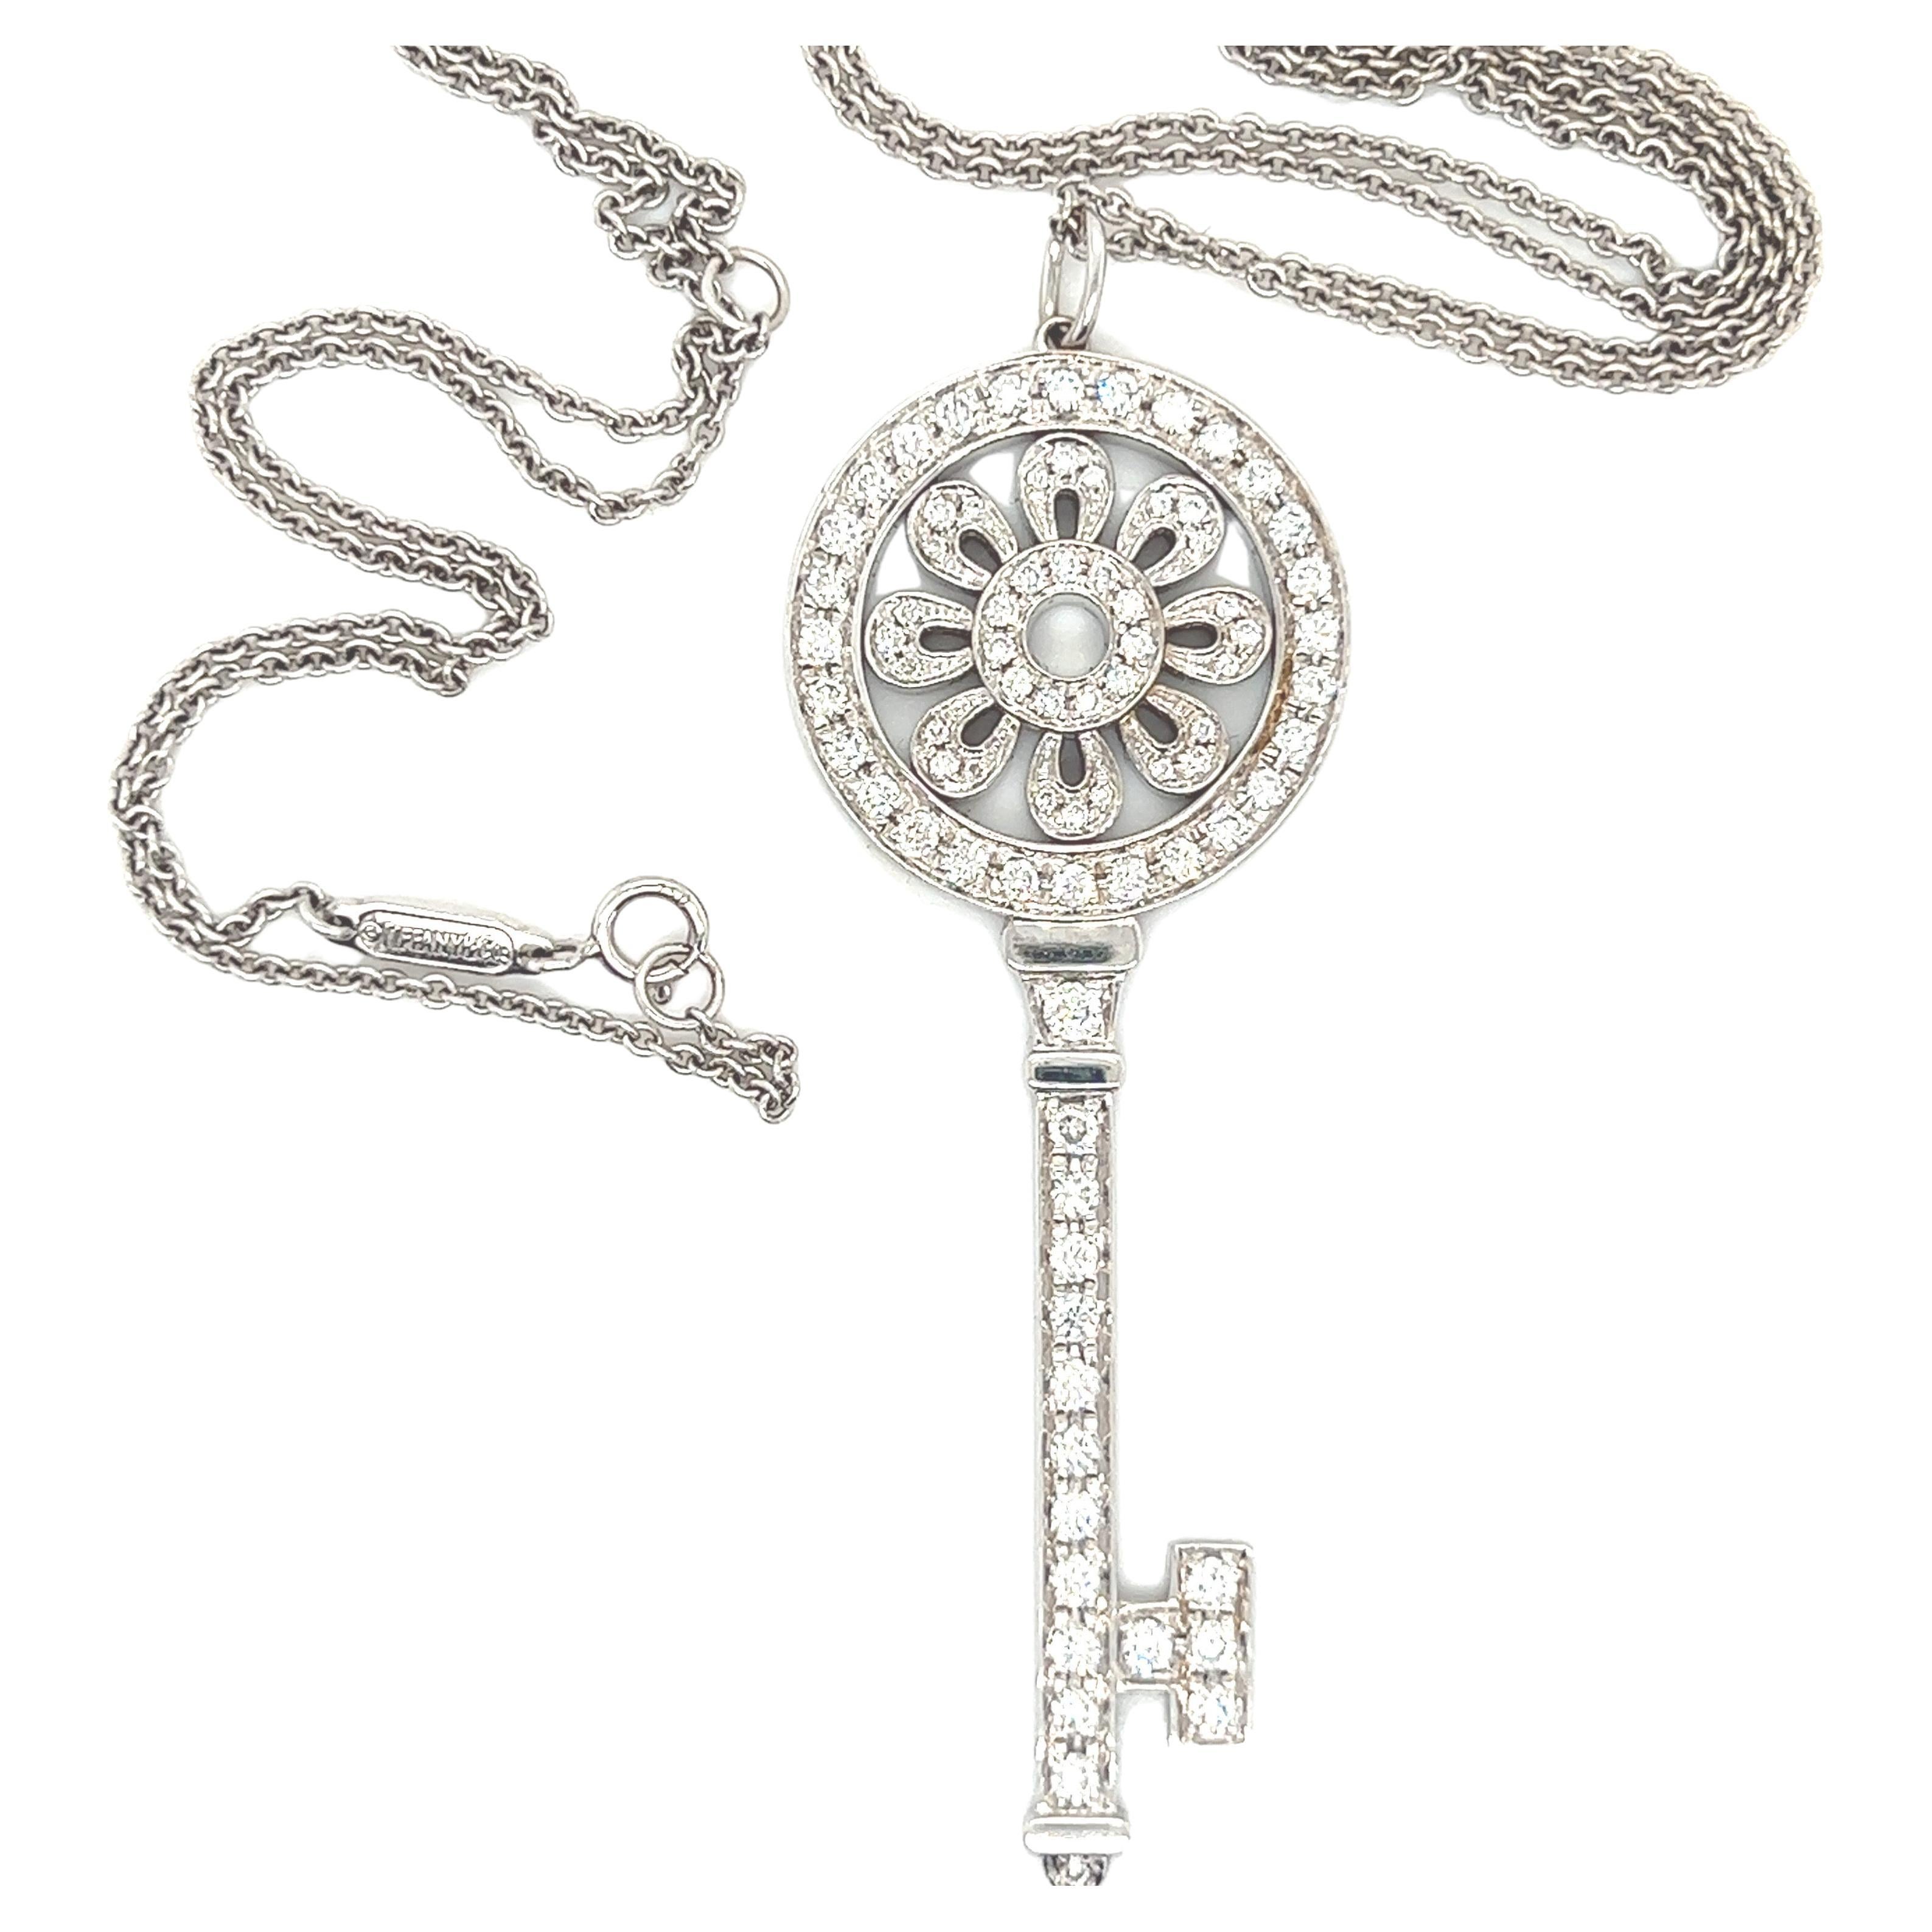 Tiffany white gold diamond large petal key pendant and chain.  For Sale